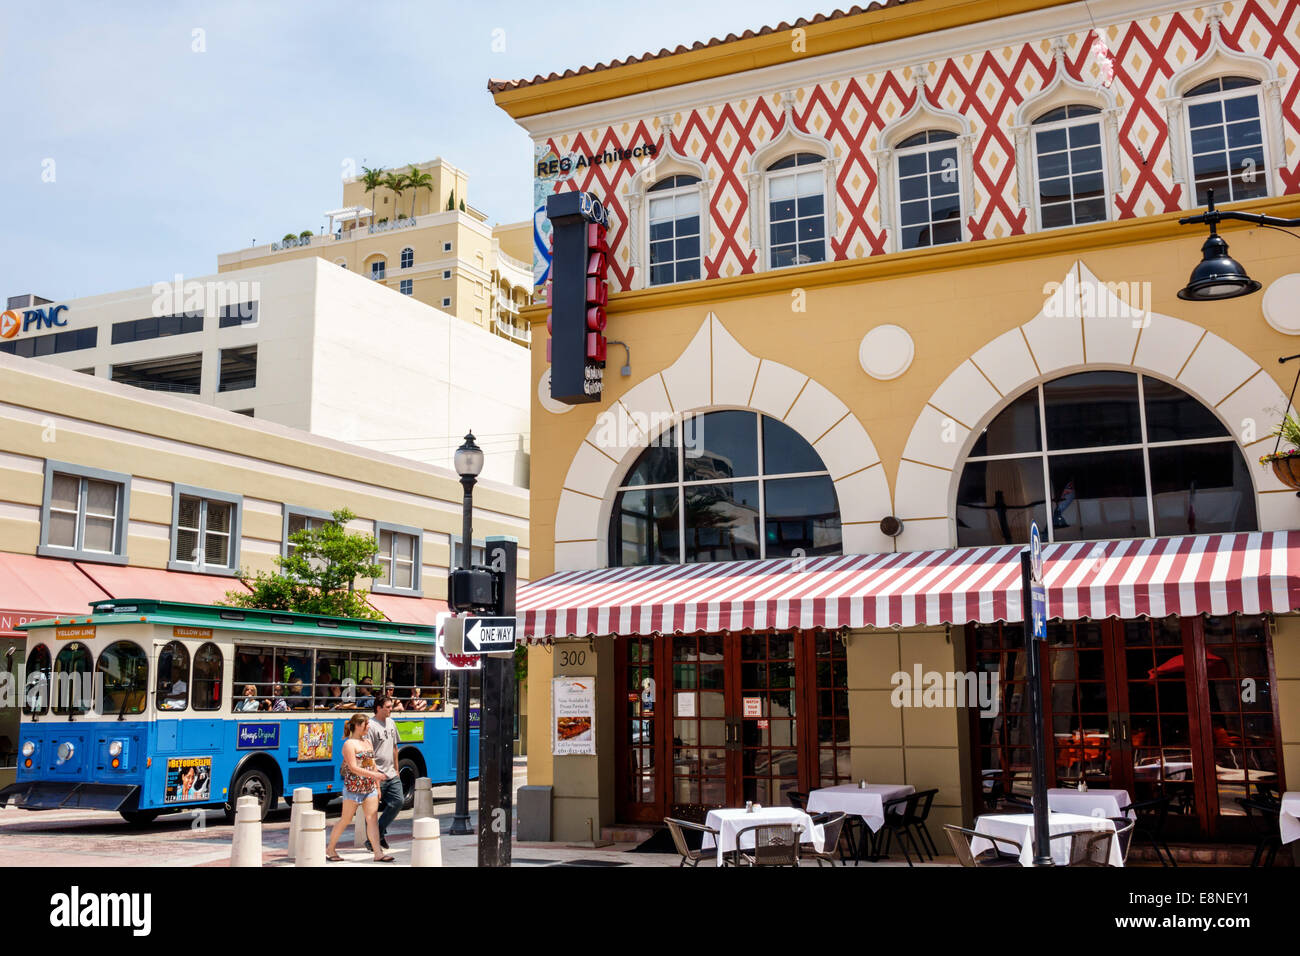 West Palm Beach Florida,Clematis Street,downtown,Don Ramon Cuban Cuisine,restaurant restaurants food dining eating out cafe cafes bistro,WPB Downtown Stock Photo